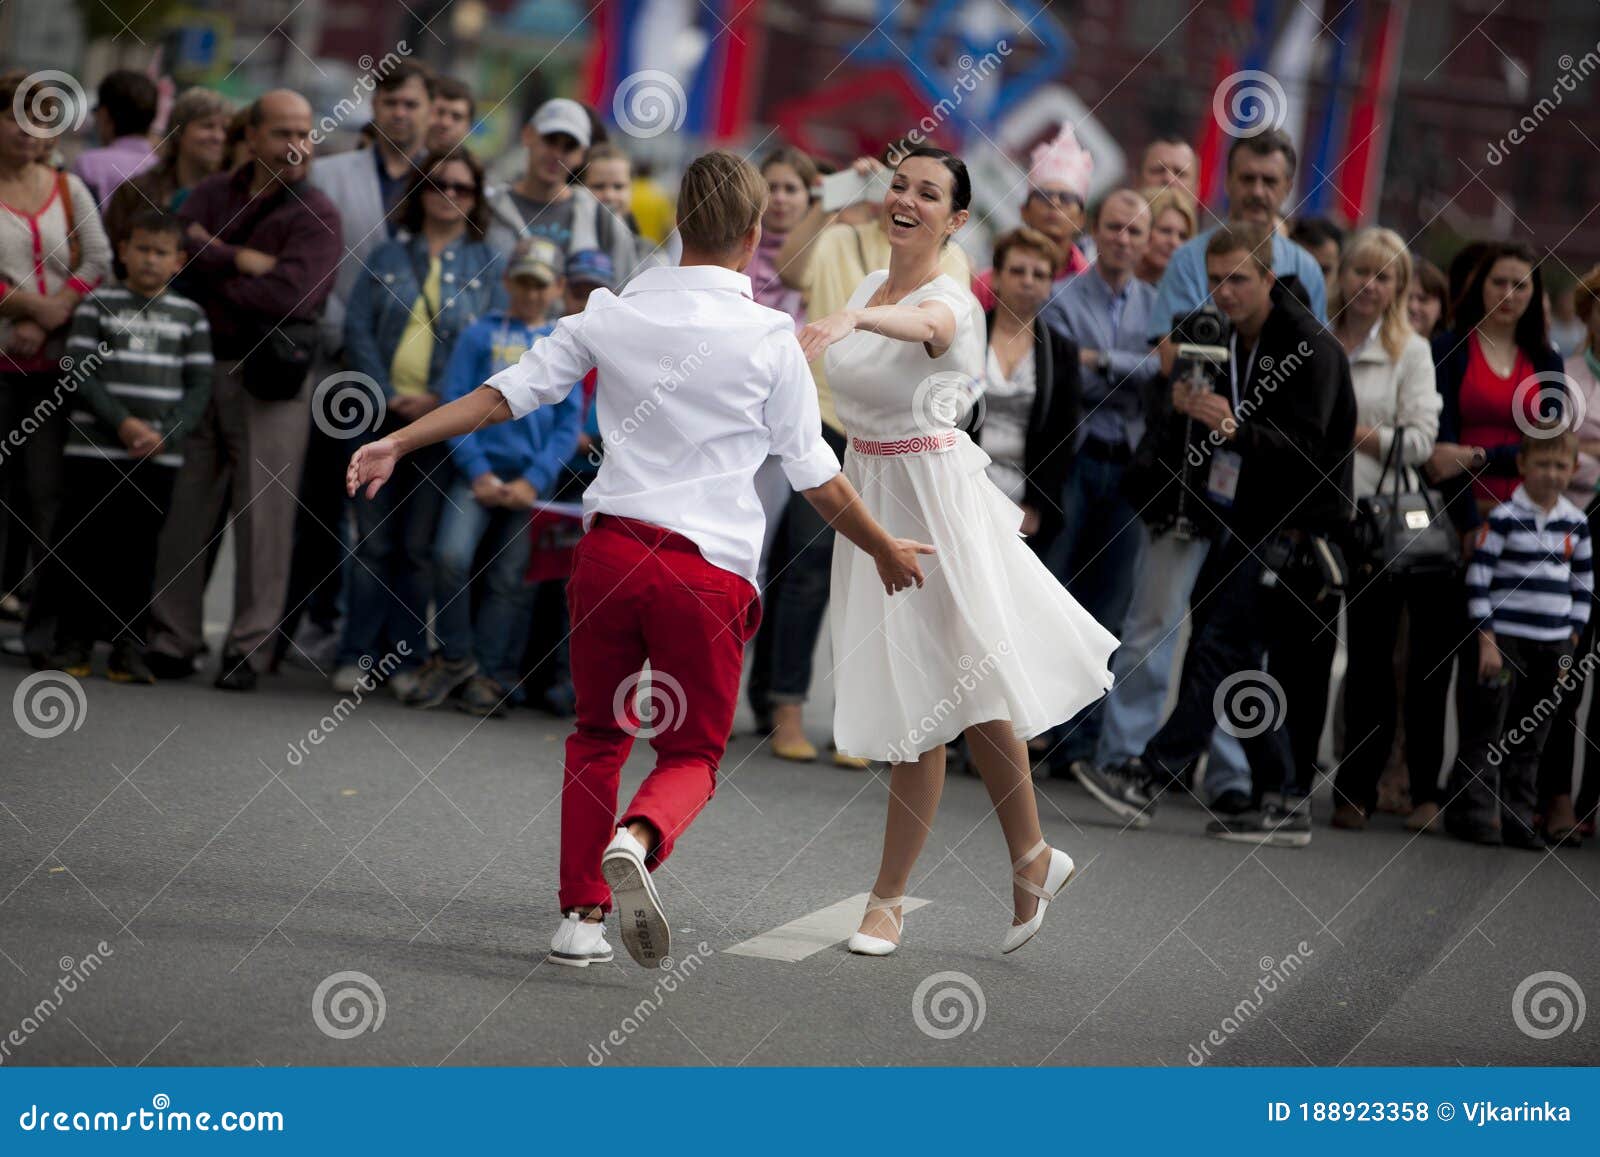 9 September 2014. Moscow, Russia. Festive Parade Near Red ...